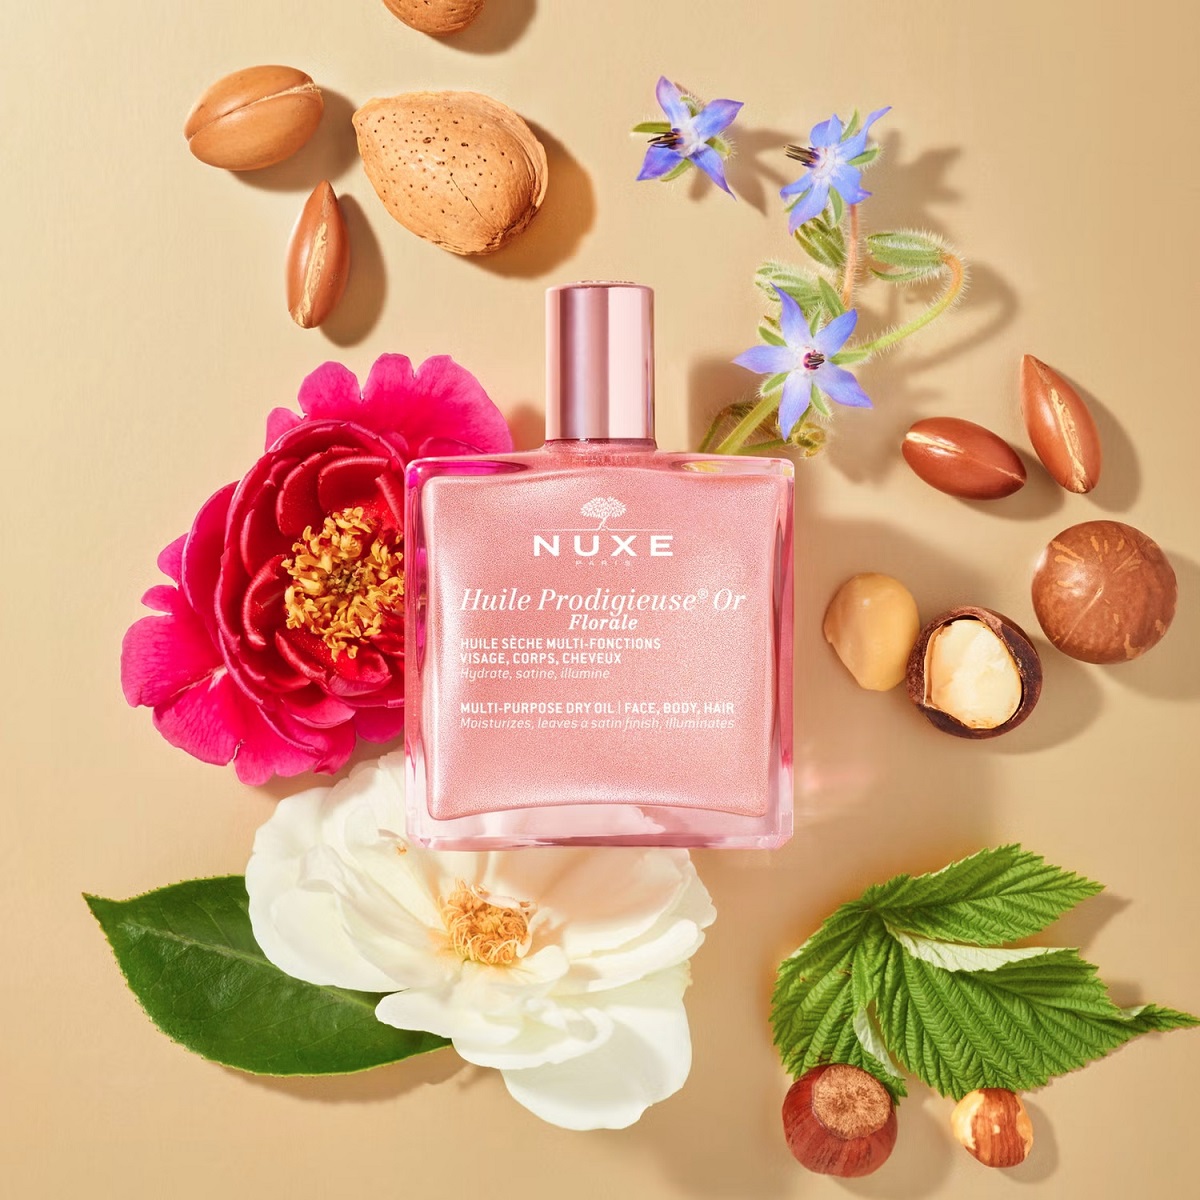 NUXE Huile Prodigieuse Shimmering Florale Multi Purpose Dry Oil